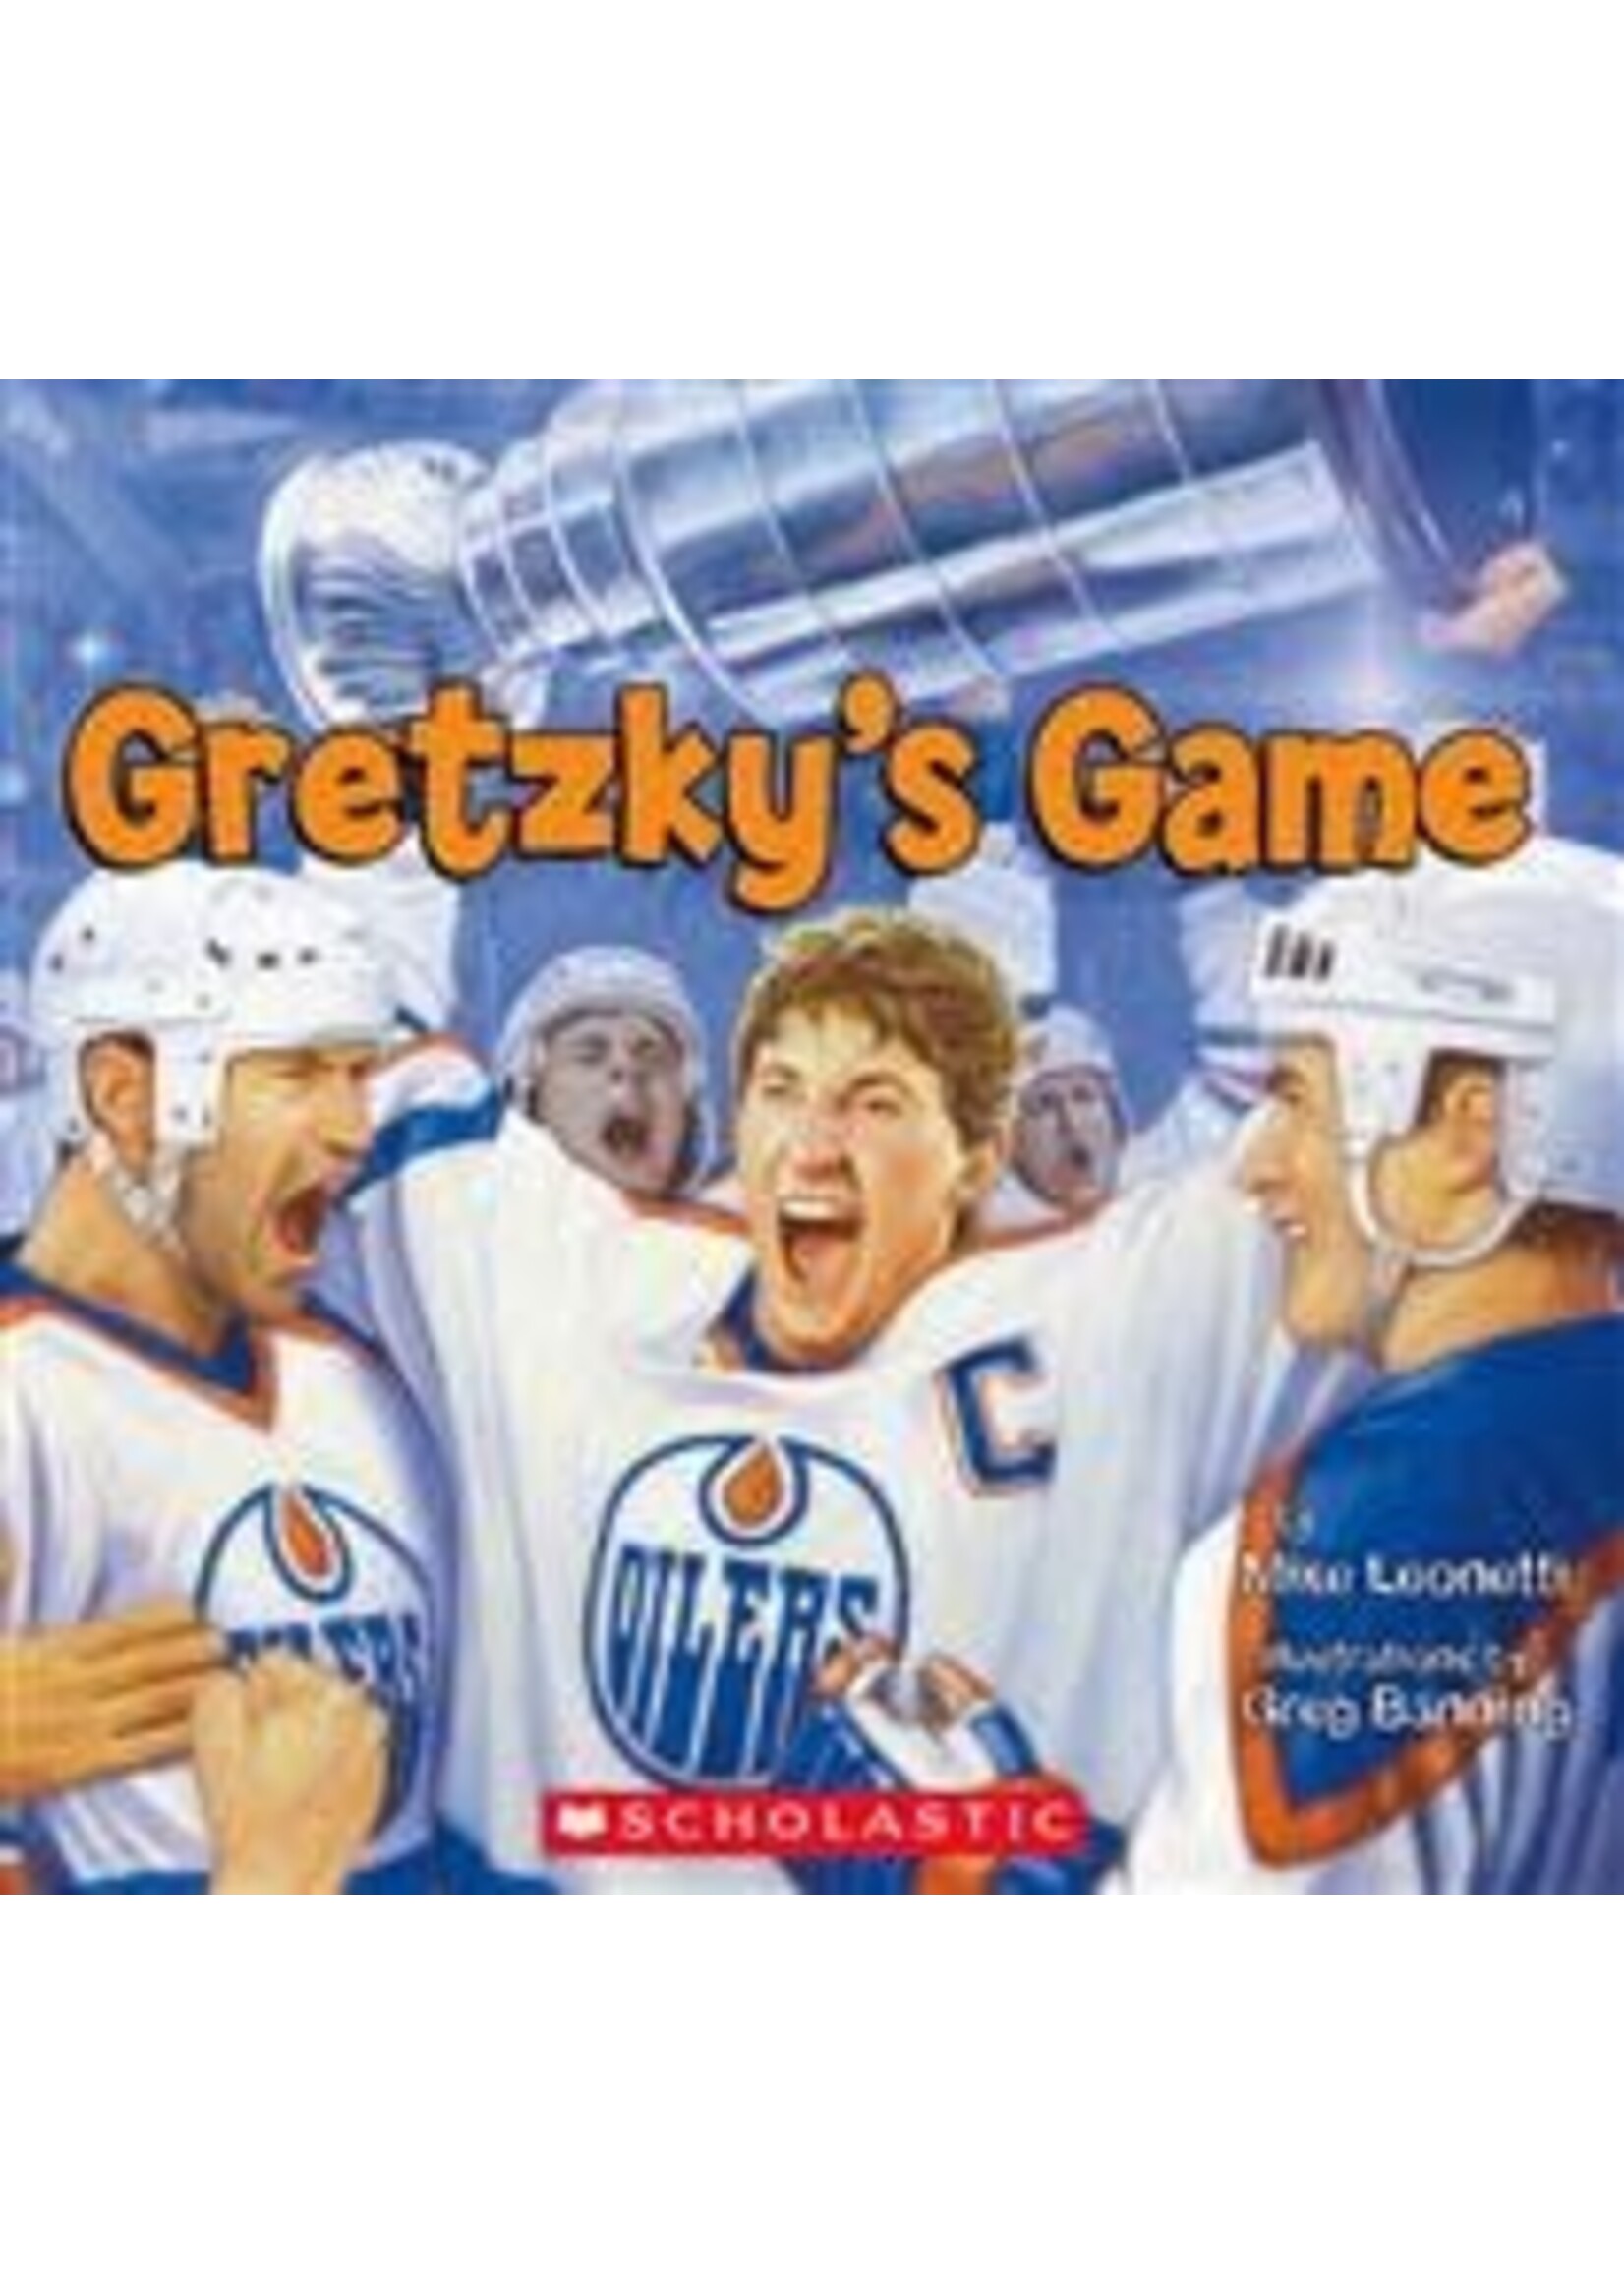 Gretzky's Game by Mike Leonetti, Greg Banning